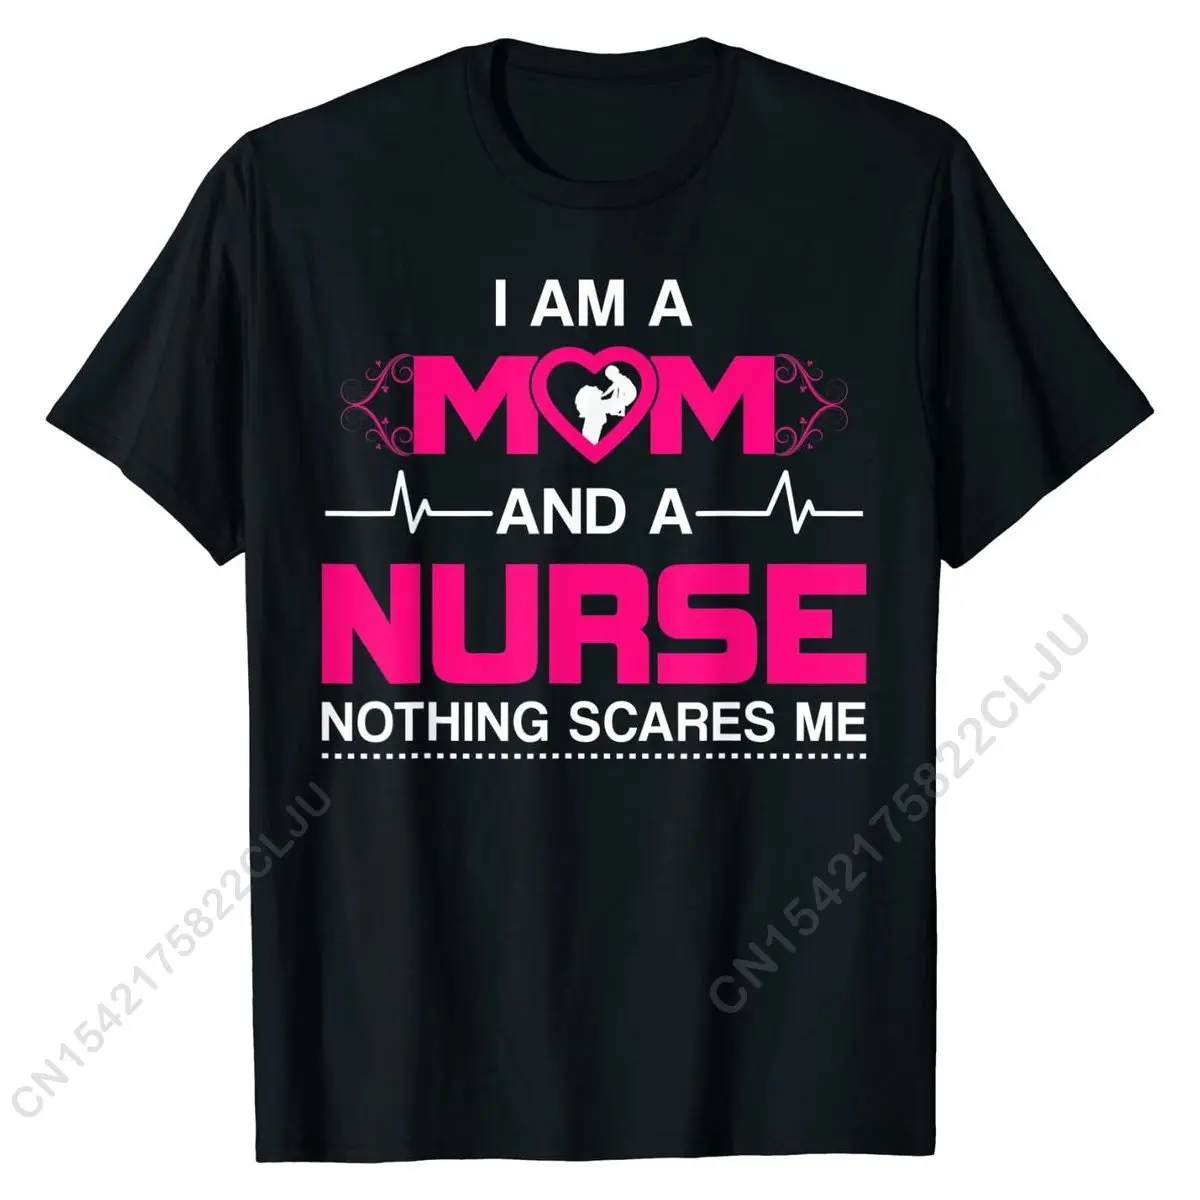 

I Am A Mom And A Nurse Nothing Scares Me Funny Nurse T-shirt Hip Hop Casual Tops T Shirt Cotton T Shirt For Male Design